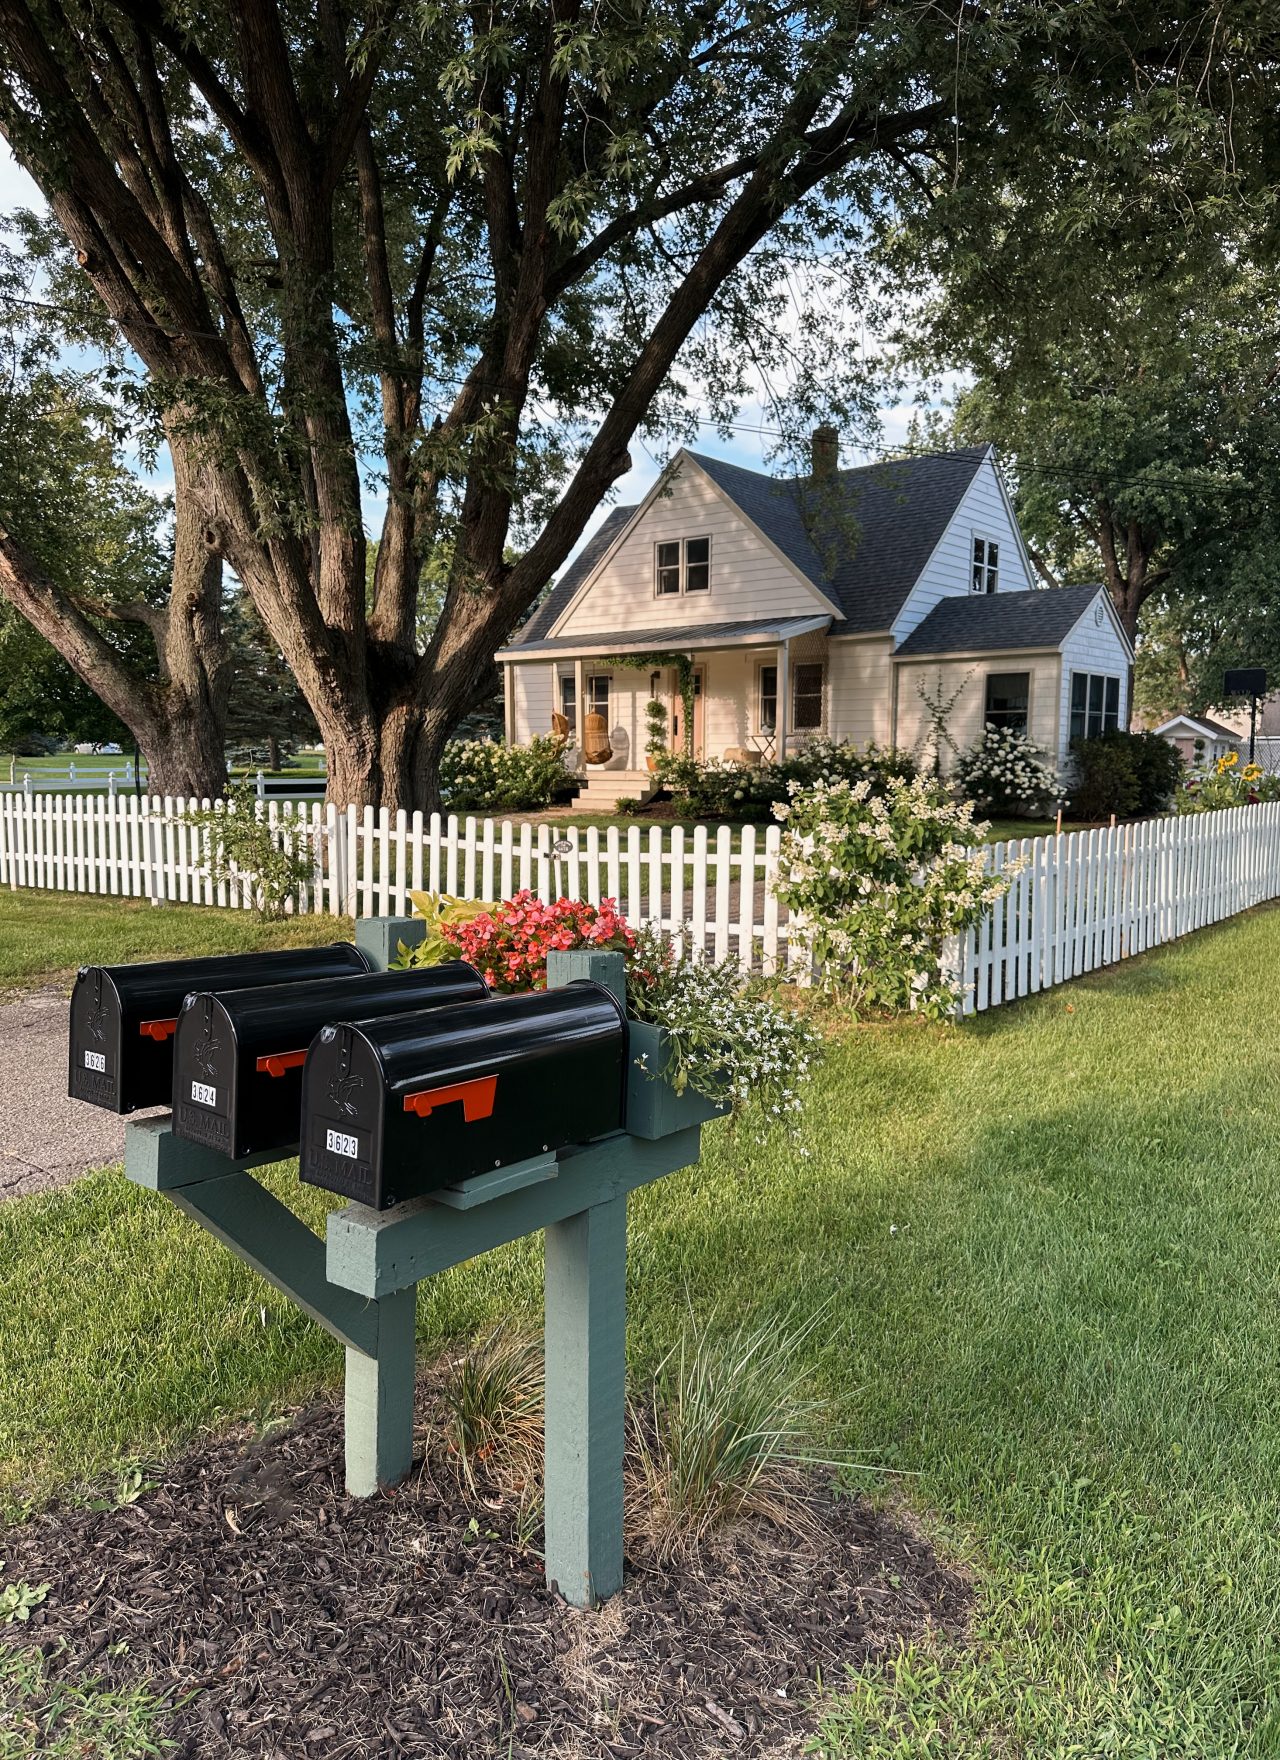 Adding Curb Appeal with a Mailbox Refresh